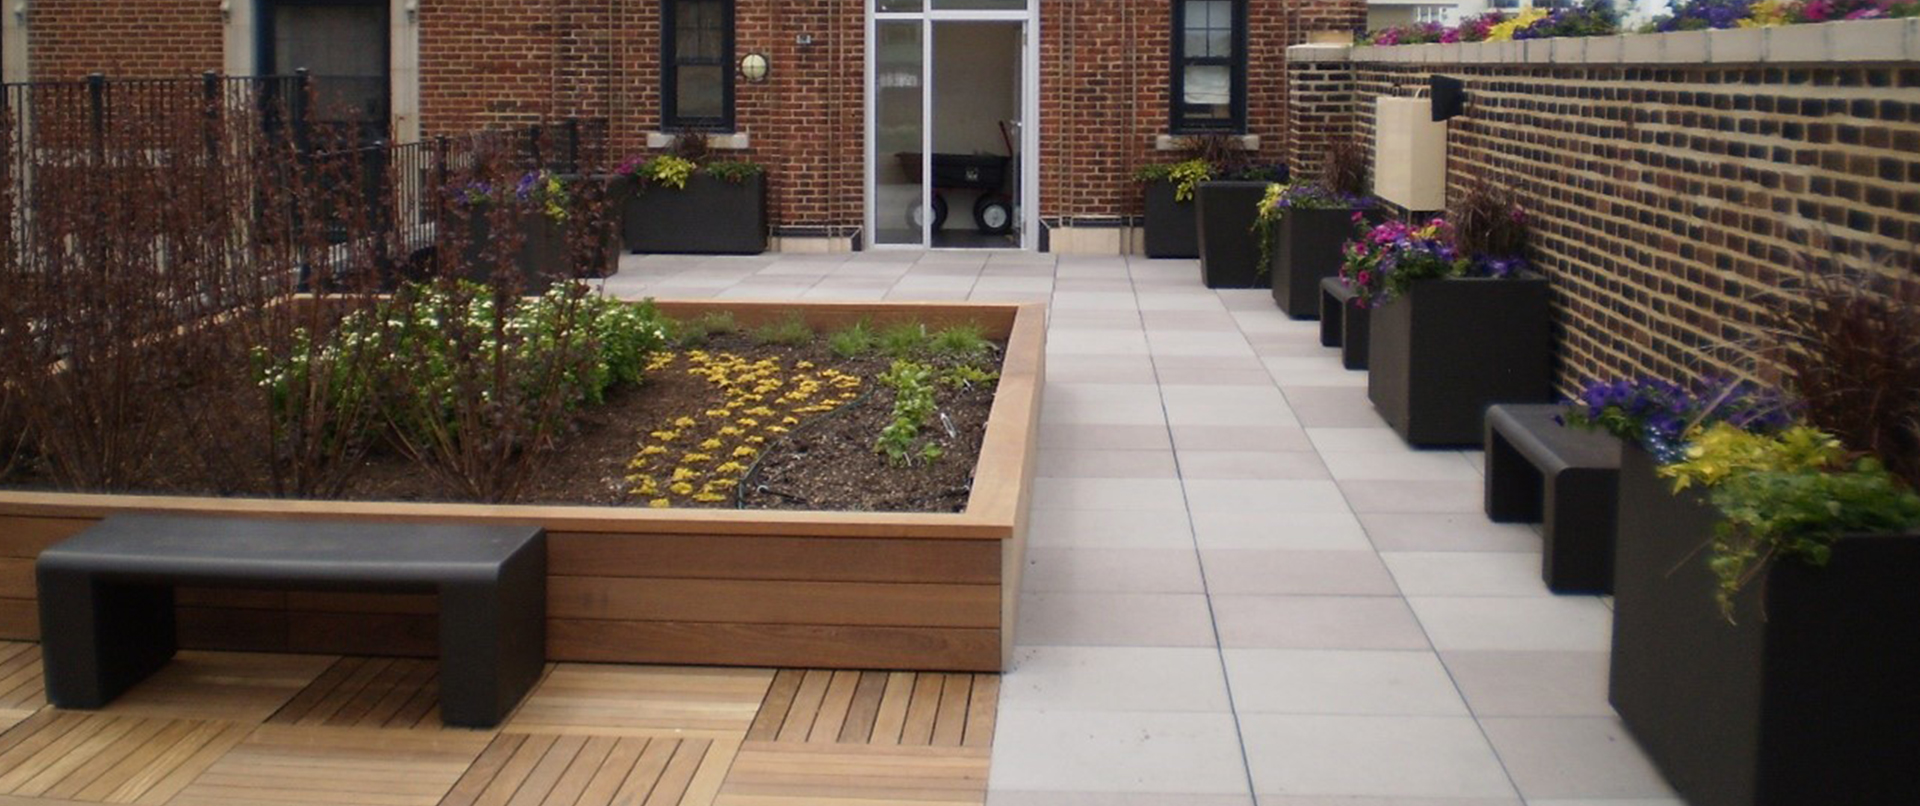 Large Planter on Rooftop Terrace